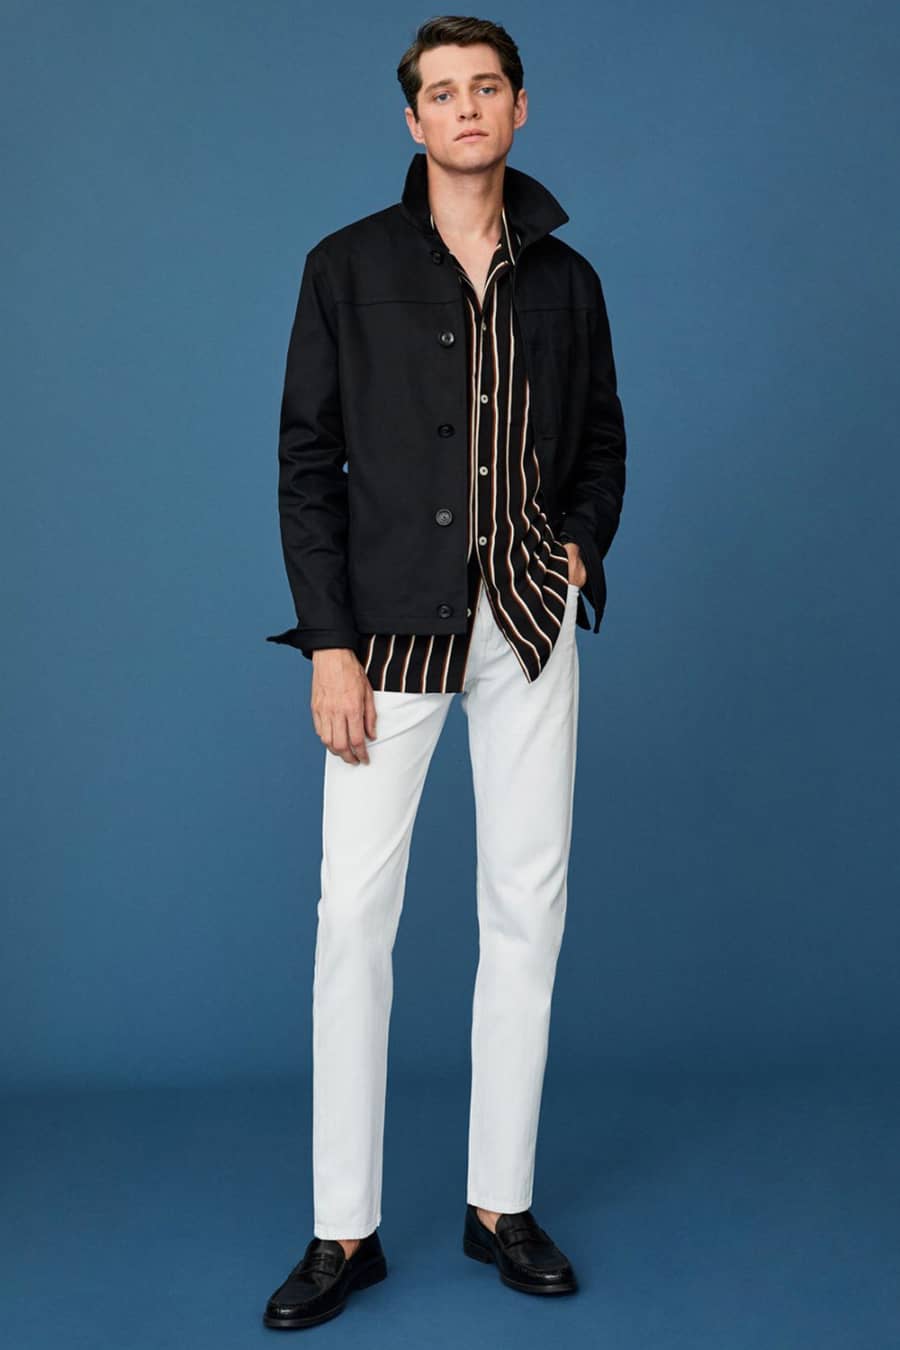 Men's white pants, black vertical striped shirt, black overshirt and black loafers outfit